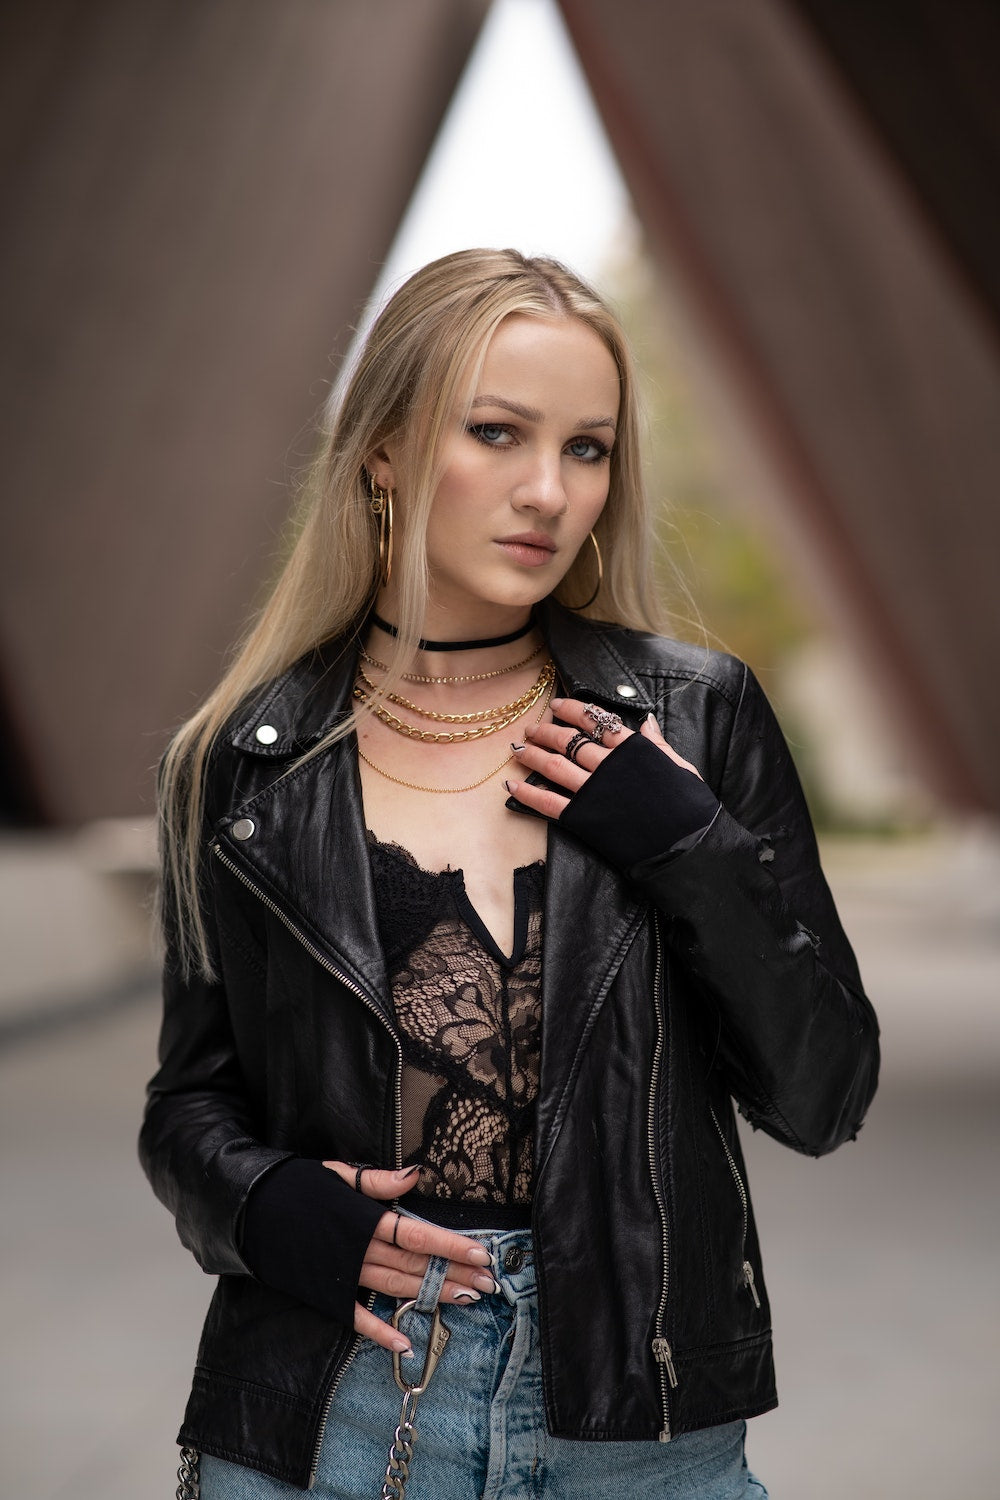 Night out in Paris outfits vegan leather jacket